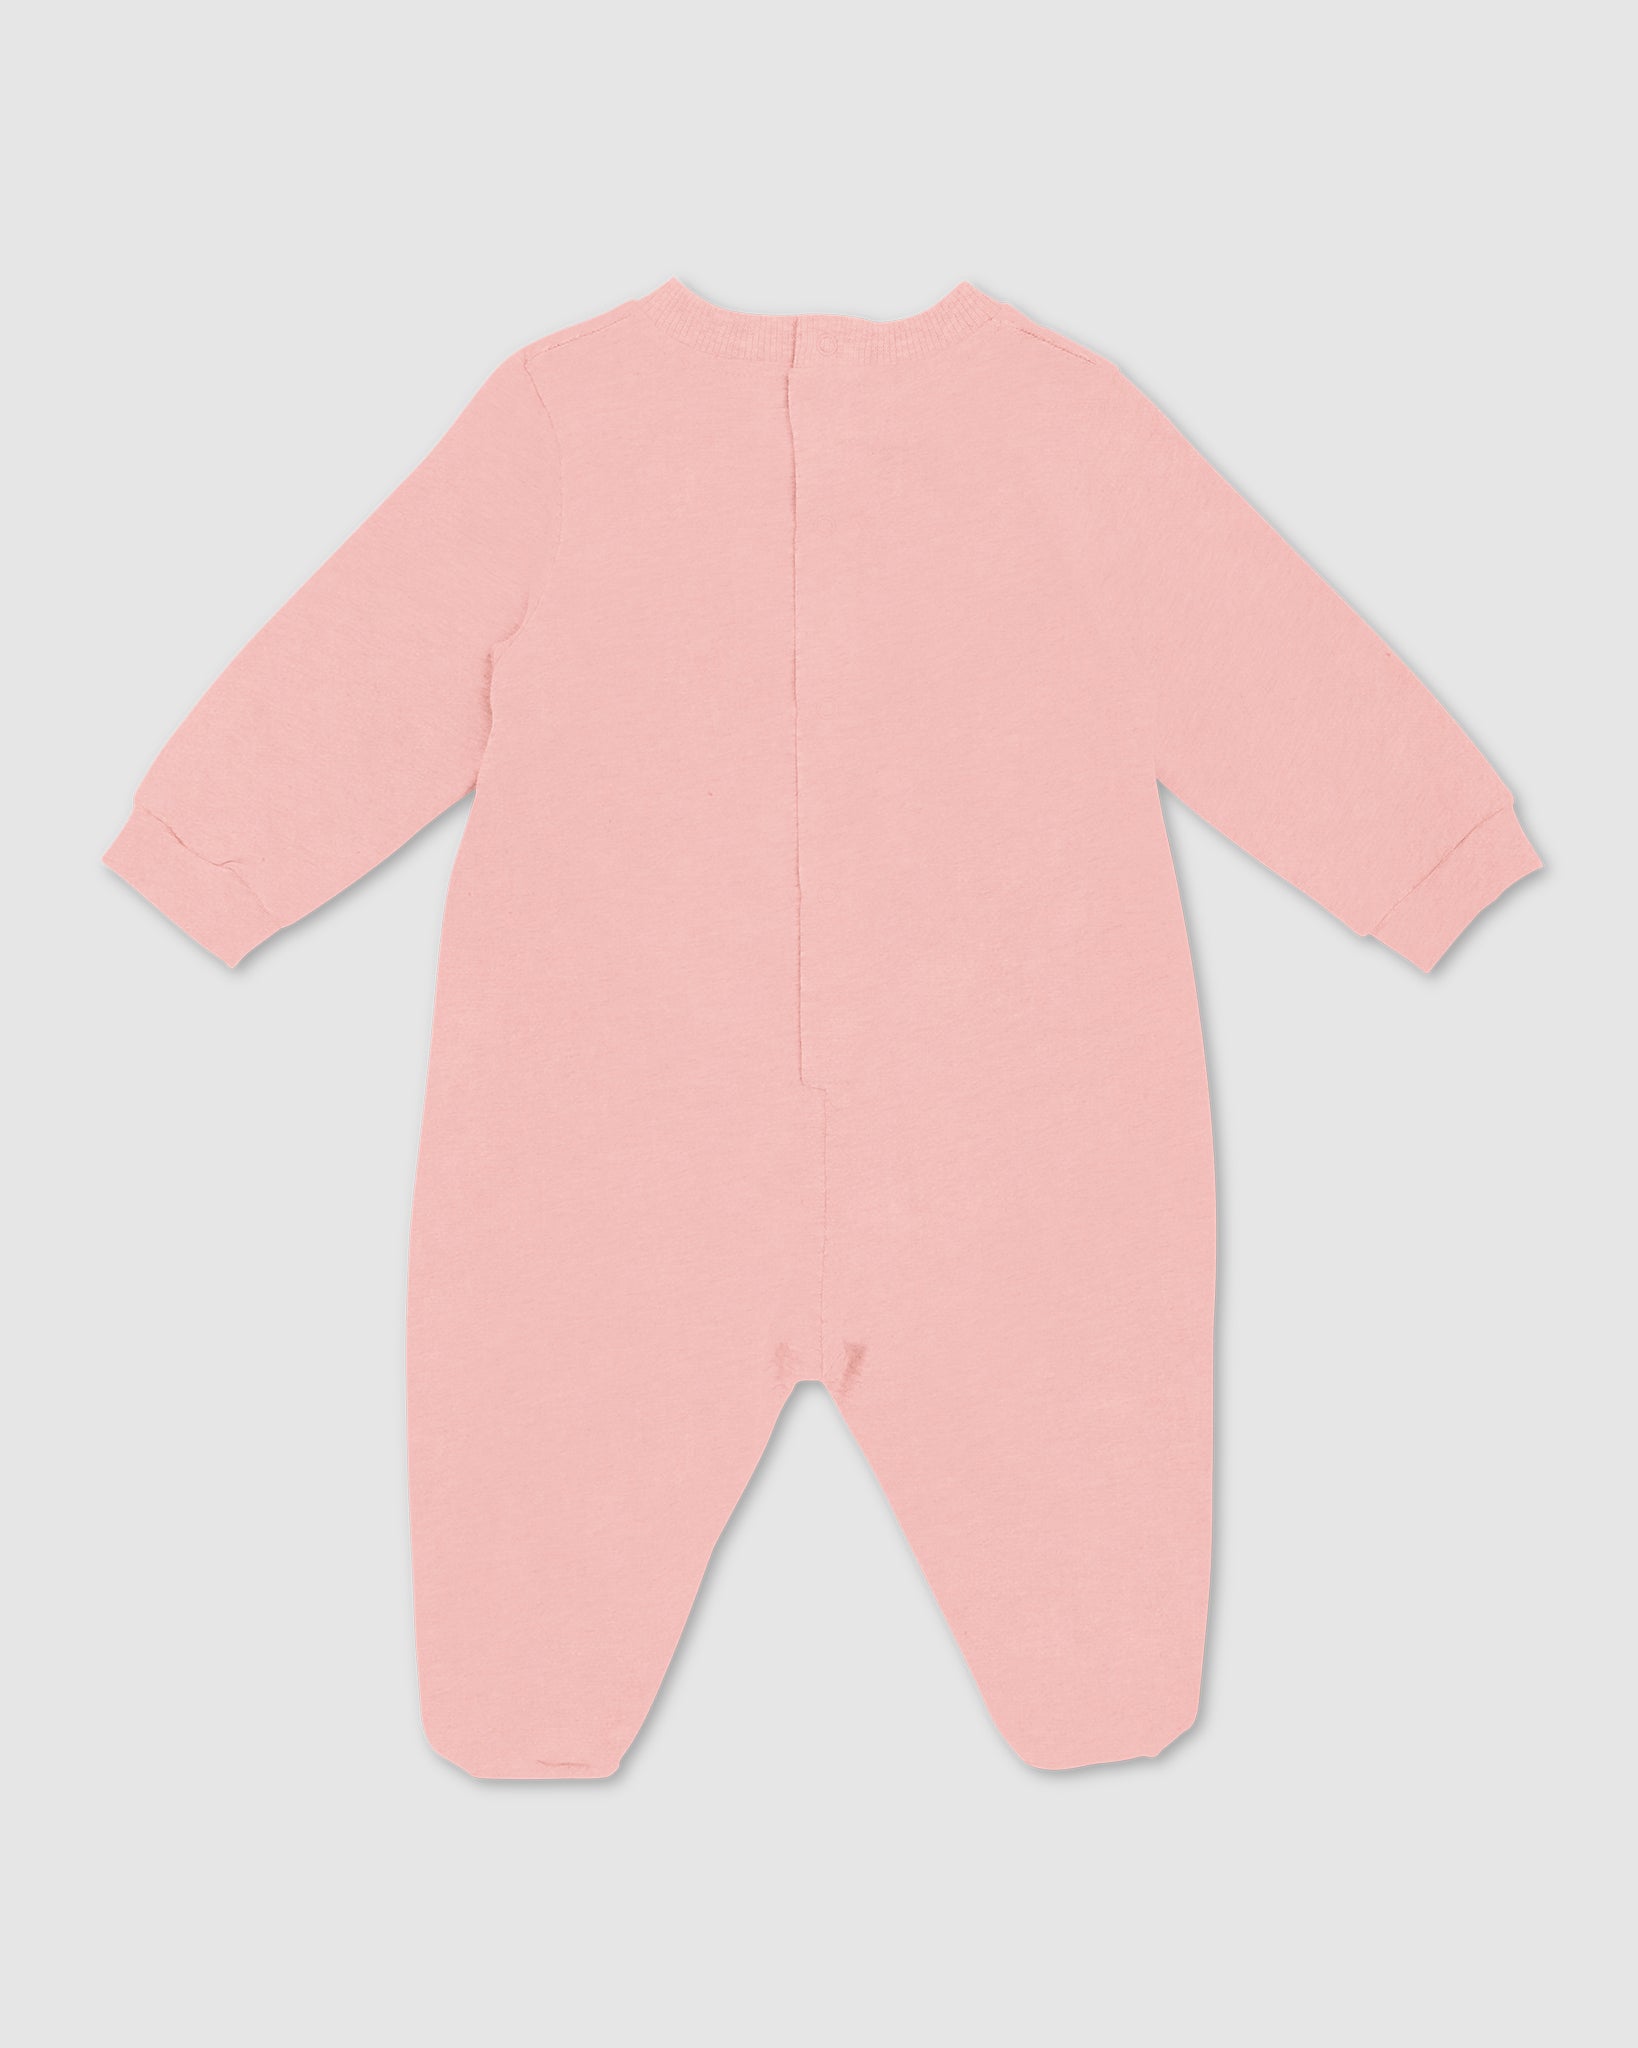 Baby Cherry Playsuit: Girl Playsuits and Gift Set Off White/Pink | GCDS